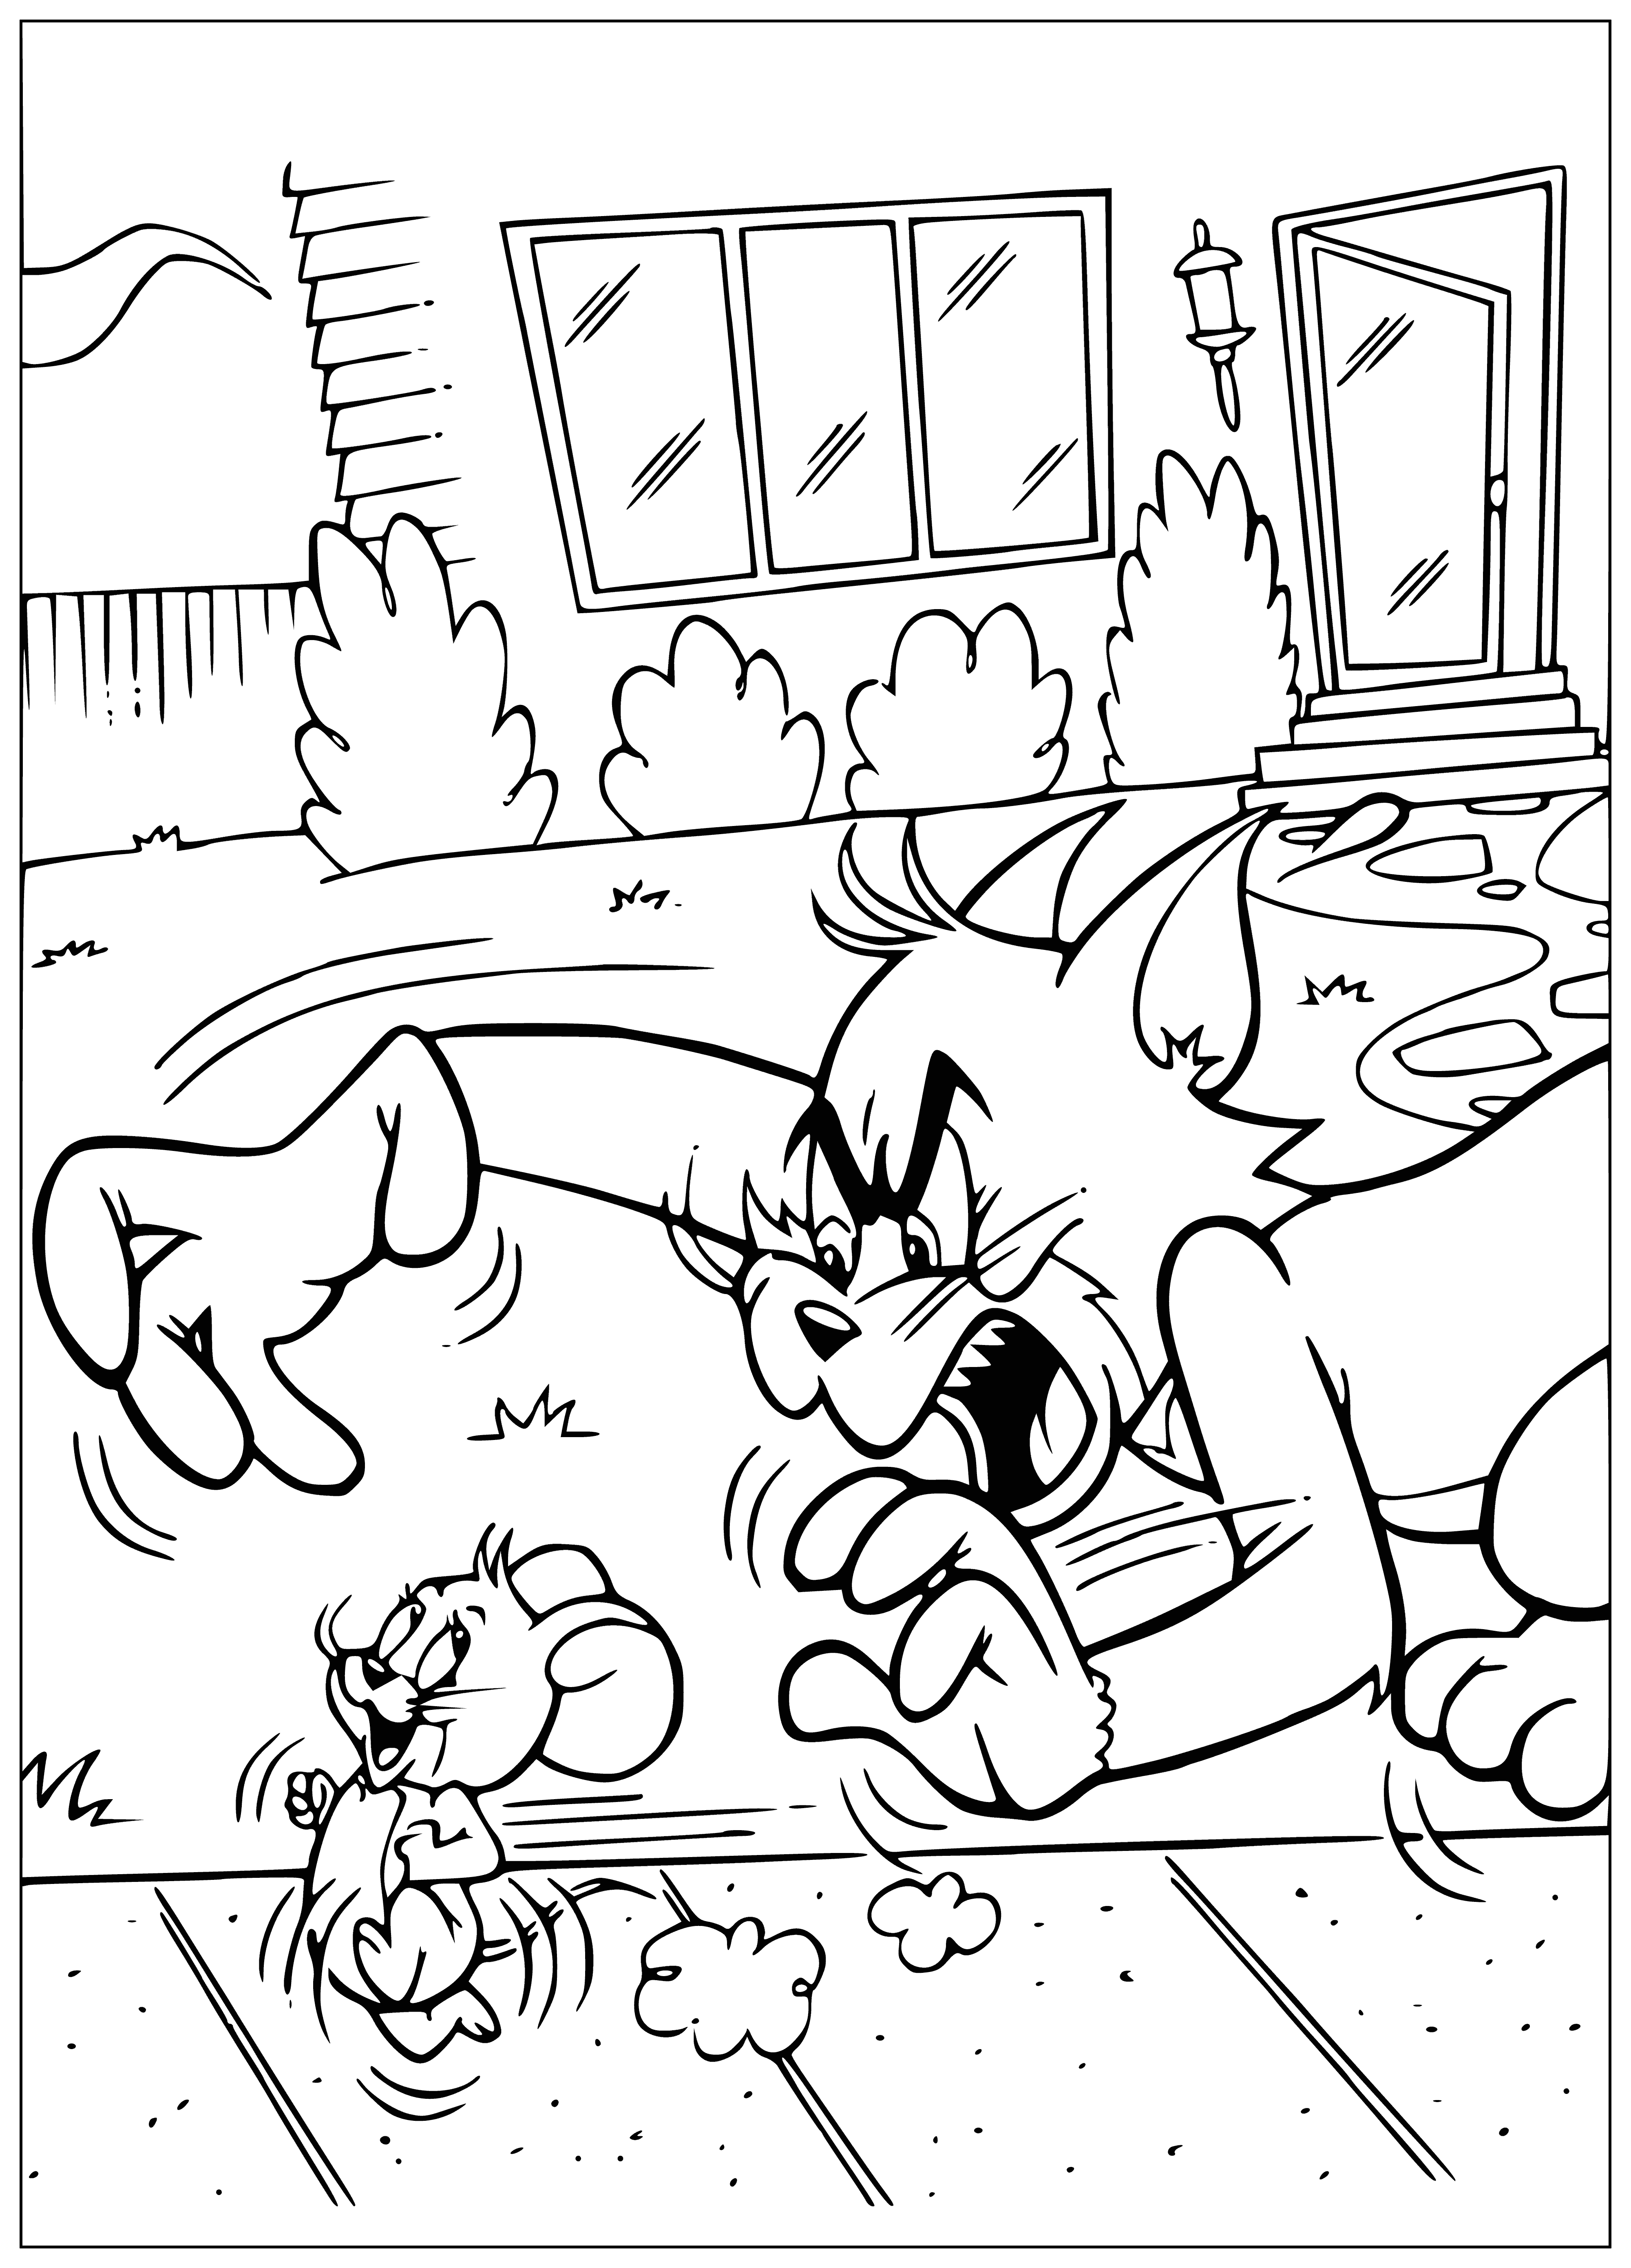 coloring page: Tom is about to catch Jerry, who is desperately trying to escape.